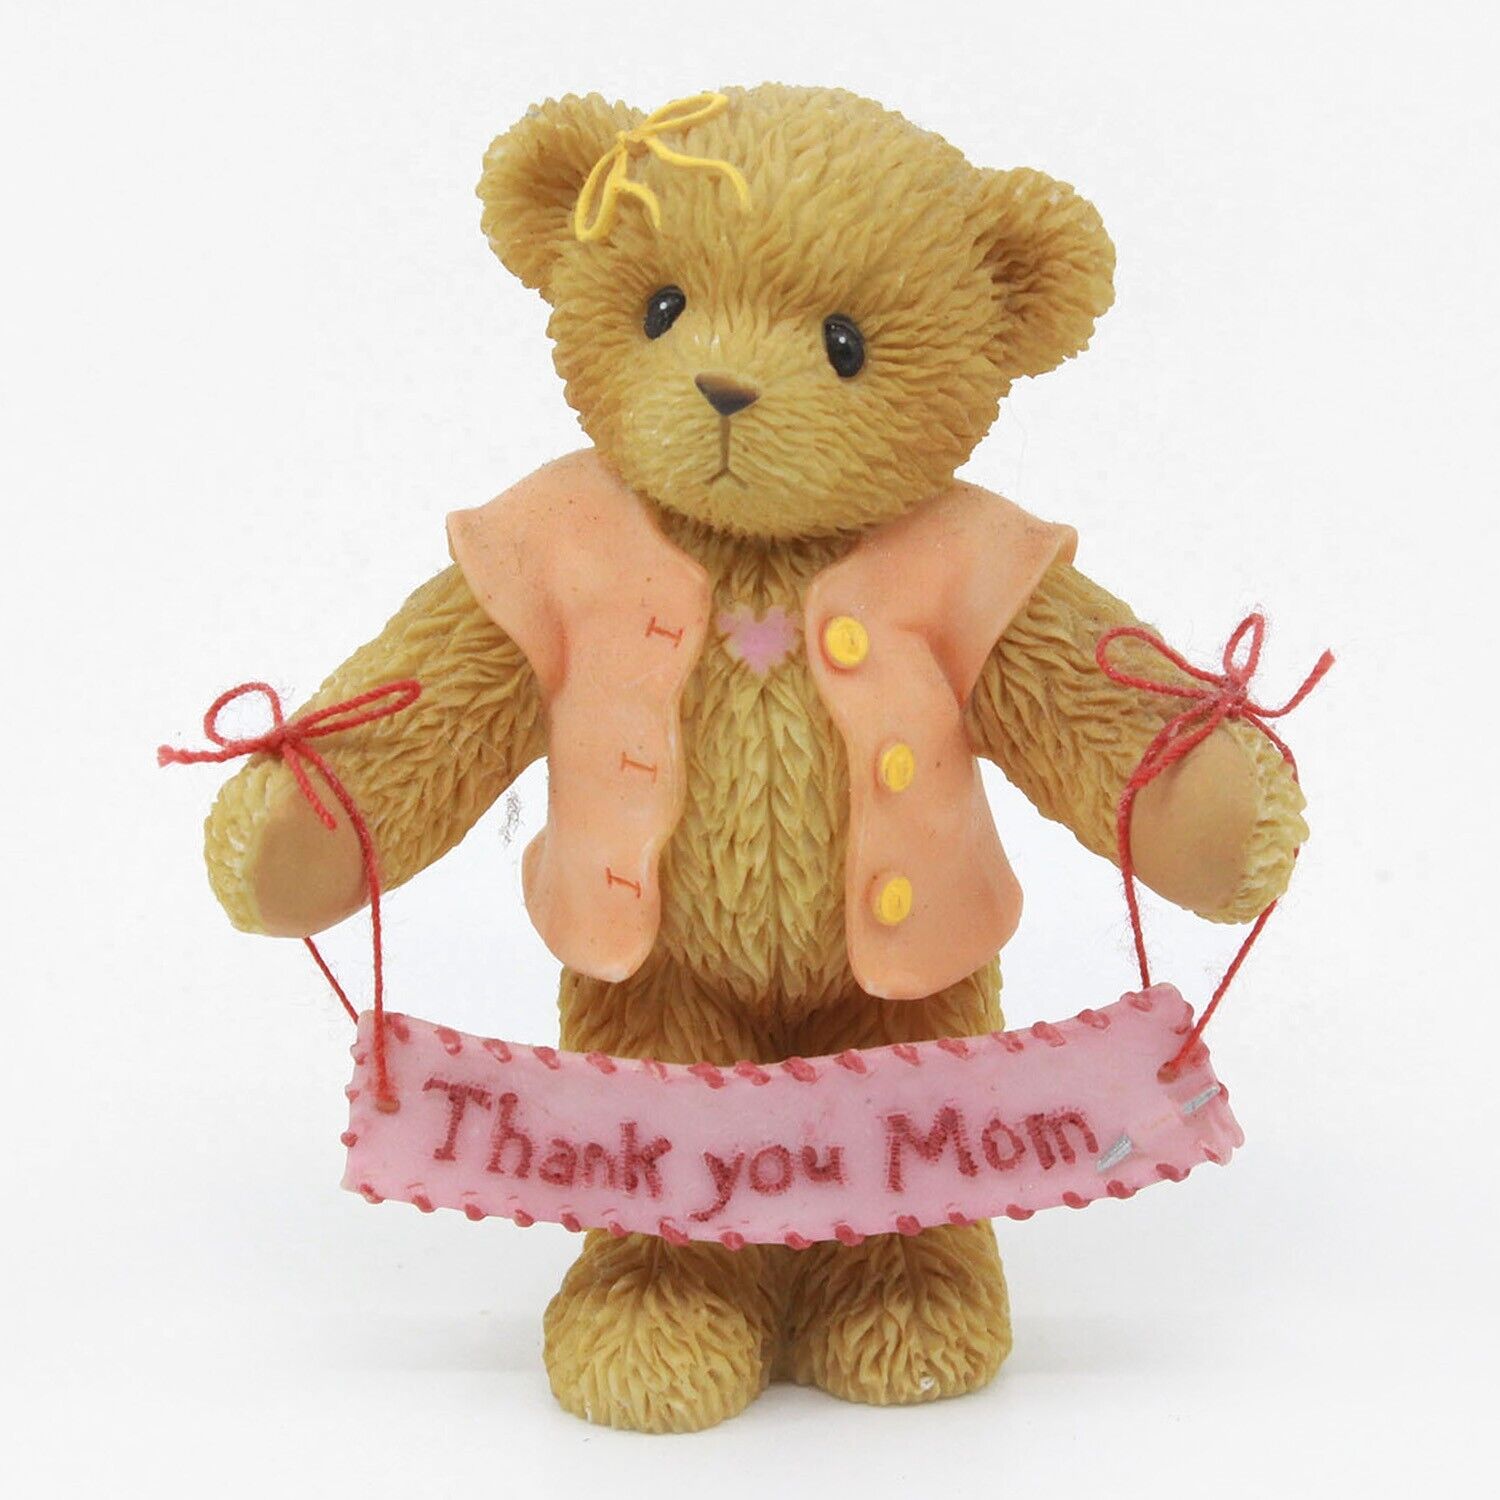 CHERISHED TEDDIES - Mother's Day THANK YOU MOM - 2003 Enesco